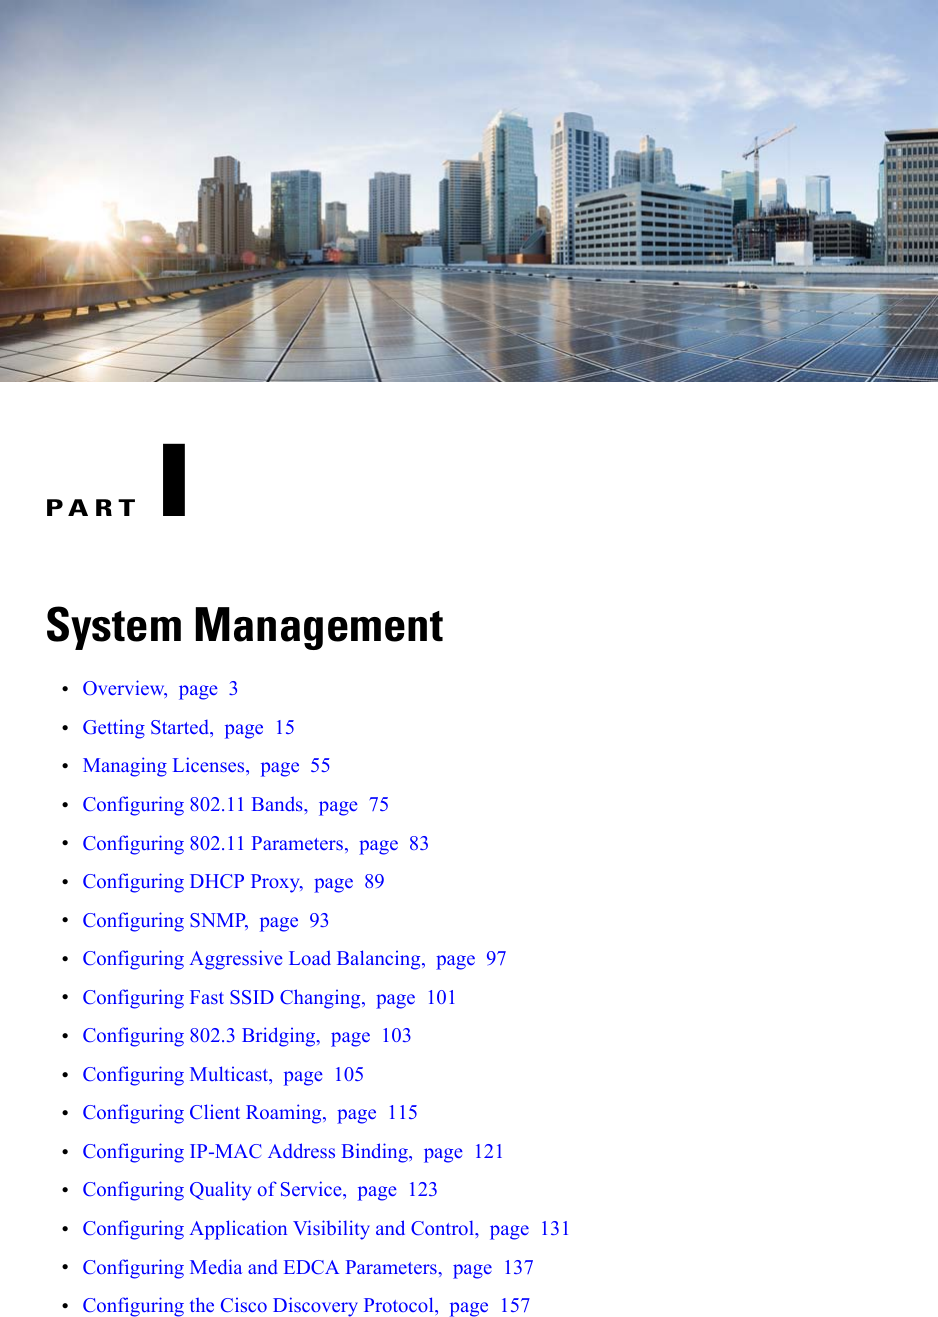 PART ISystem Management•Overview, page 3•Getting Started, page 15•Managing Licenses, page 55•Configuring 802.11 Bands, page 75•Configuring 802.11 Parameters, page 83•Configuring DHCP Proxy, page 89•Configuring SNMP, page 93•Configuring Aggressive Load Balancing, page 97•Configuring Fast SSID Changing, page 101•Configuring 802.3 Bridging, page 103•Configuring Multicast, page 105•Configuring Client Roaming, page 115•Configuring IP-MAC Address Binding, page 121•Configuring Quality of Service, page 123•Configuring Application Visibility and Control, page 131•Configuring Media and EDCA Parameters, page 137•Configuring the Cisco Discovery Protocol, page 157